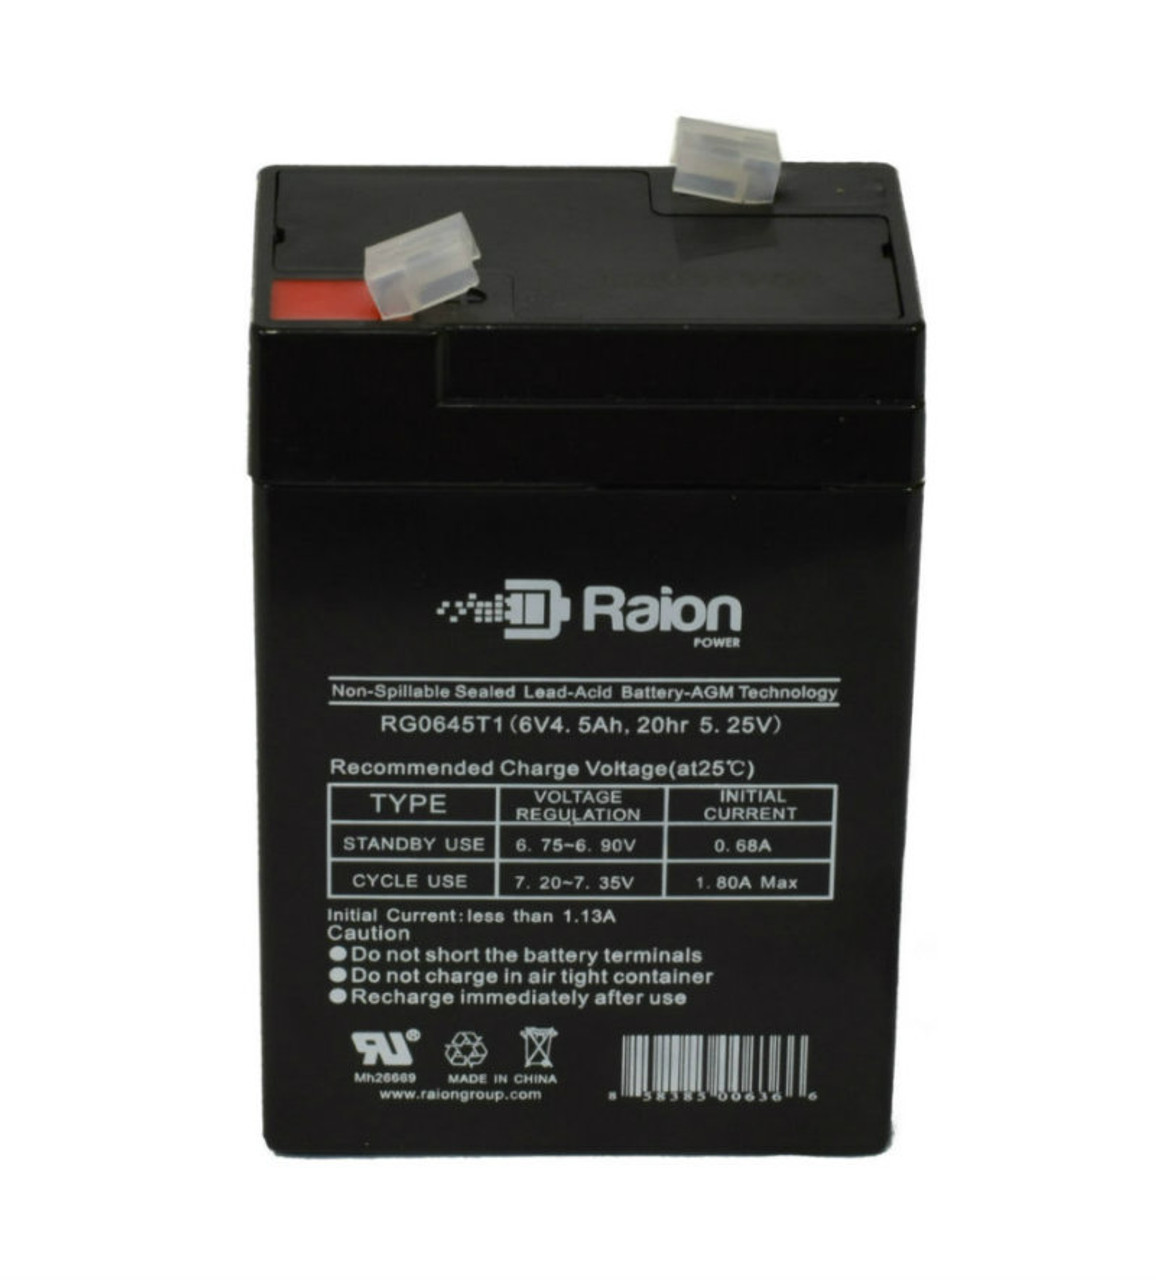 Raion Power RG0645T1 Replacement Battery Cartridge for Dual-Lite HCXURWRC12